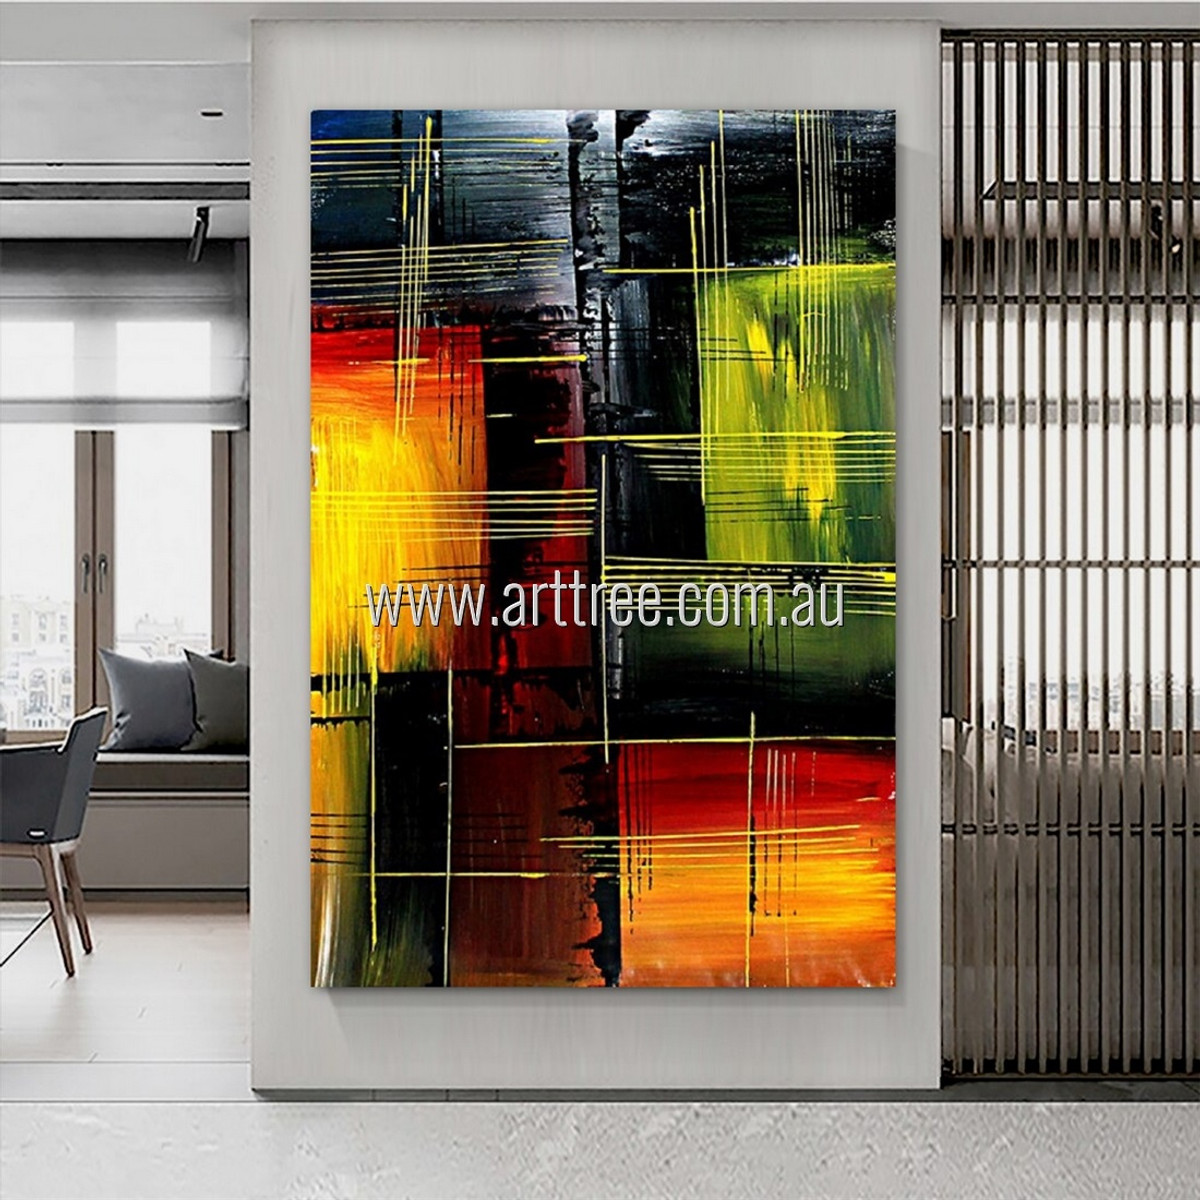 Horizontal Lines Modern Abstract Stretched Heavy Texture Artist Handmade Canvas Acrylic Painting Diy Room Decor